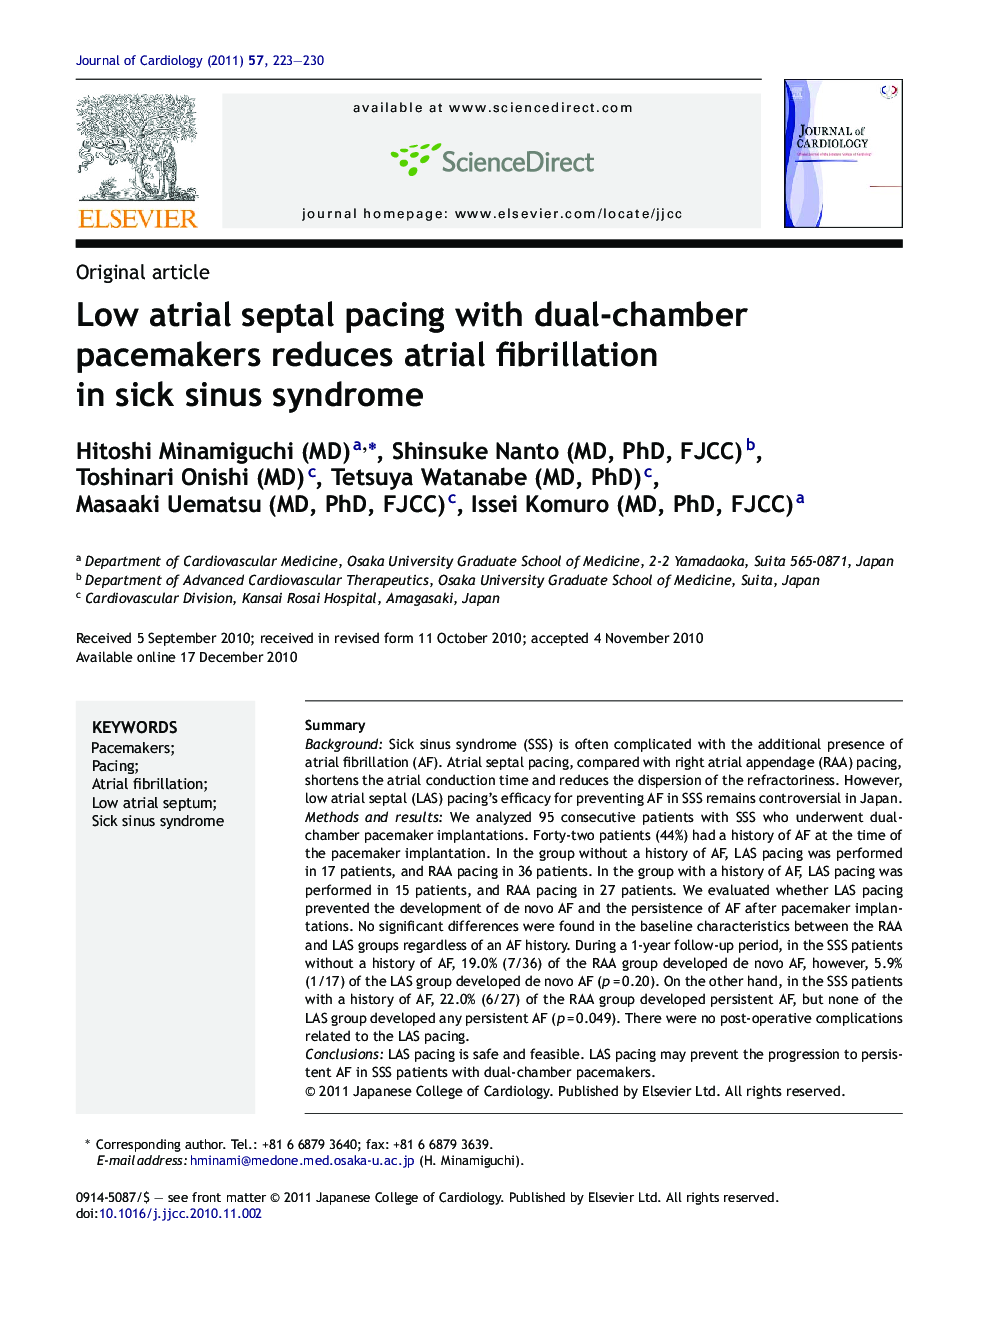 Low atrial septal pacing with dual-chamber pacemakers reduces atrial fibrillation in sick sinus syndrome